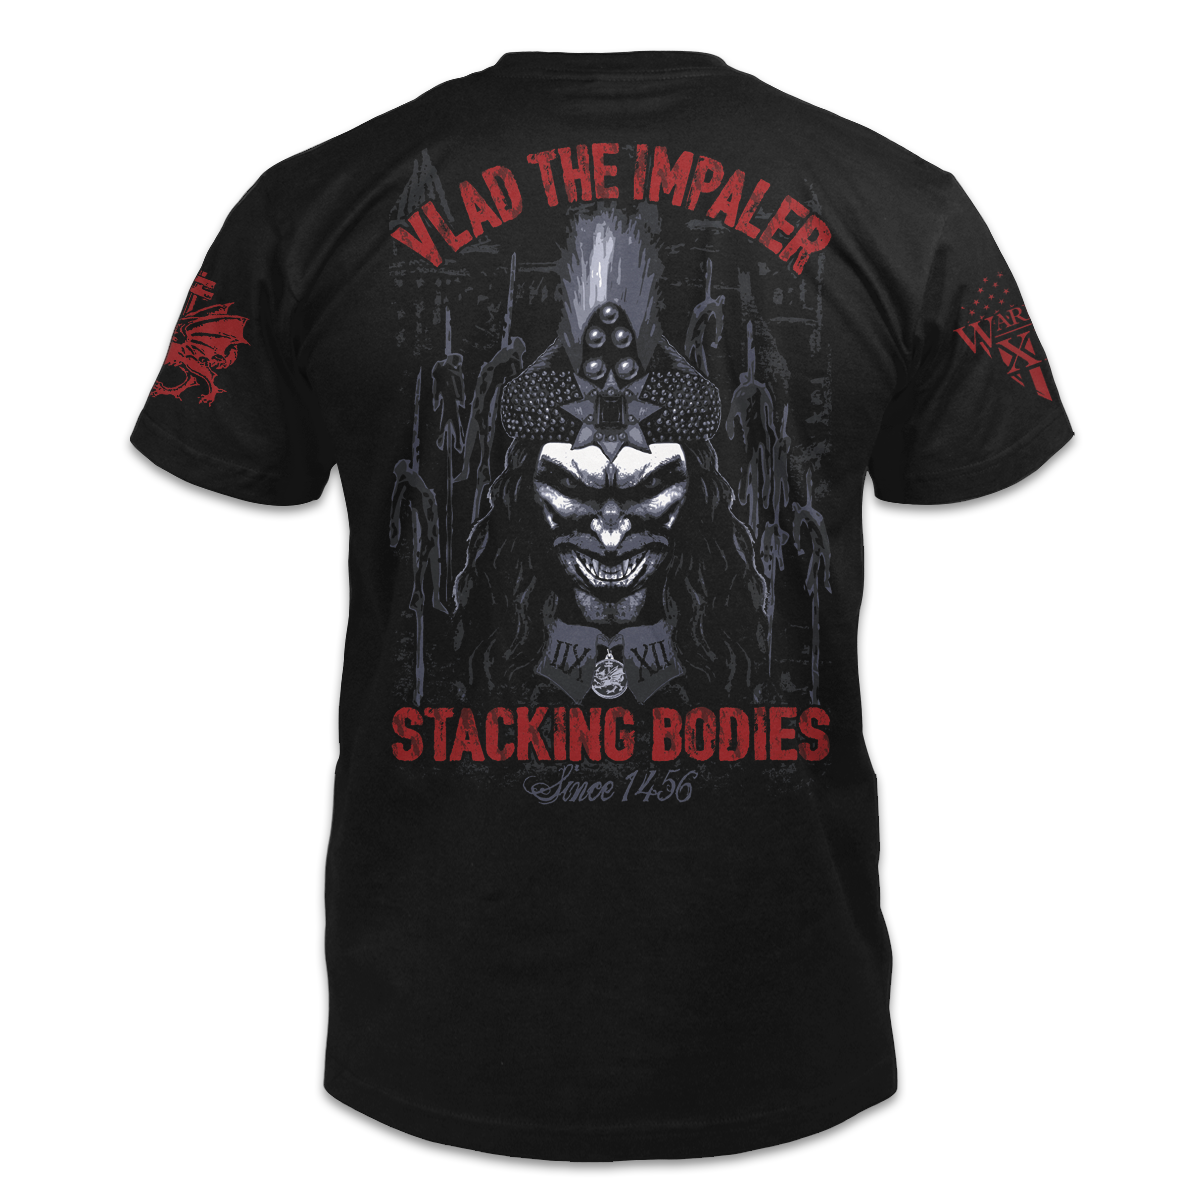 A black t-shirt with the words "Vlad The Impaler, Stacking bodies since 1456" with a Vlad printed on the back of the  shirt.